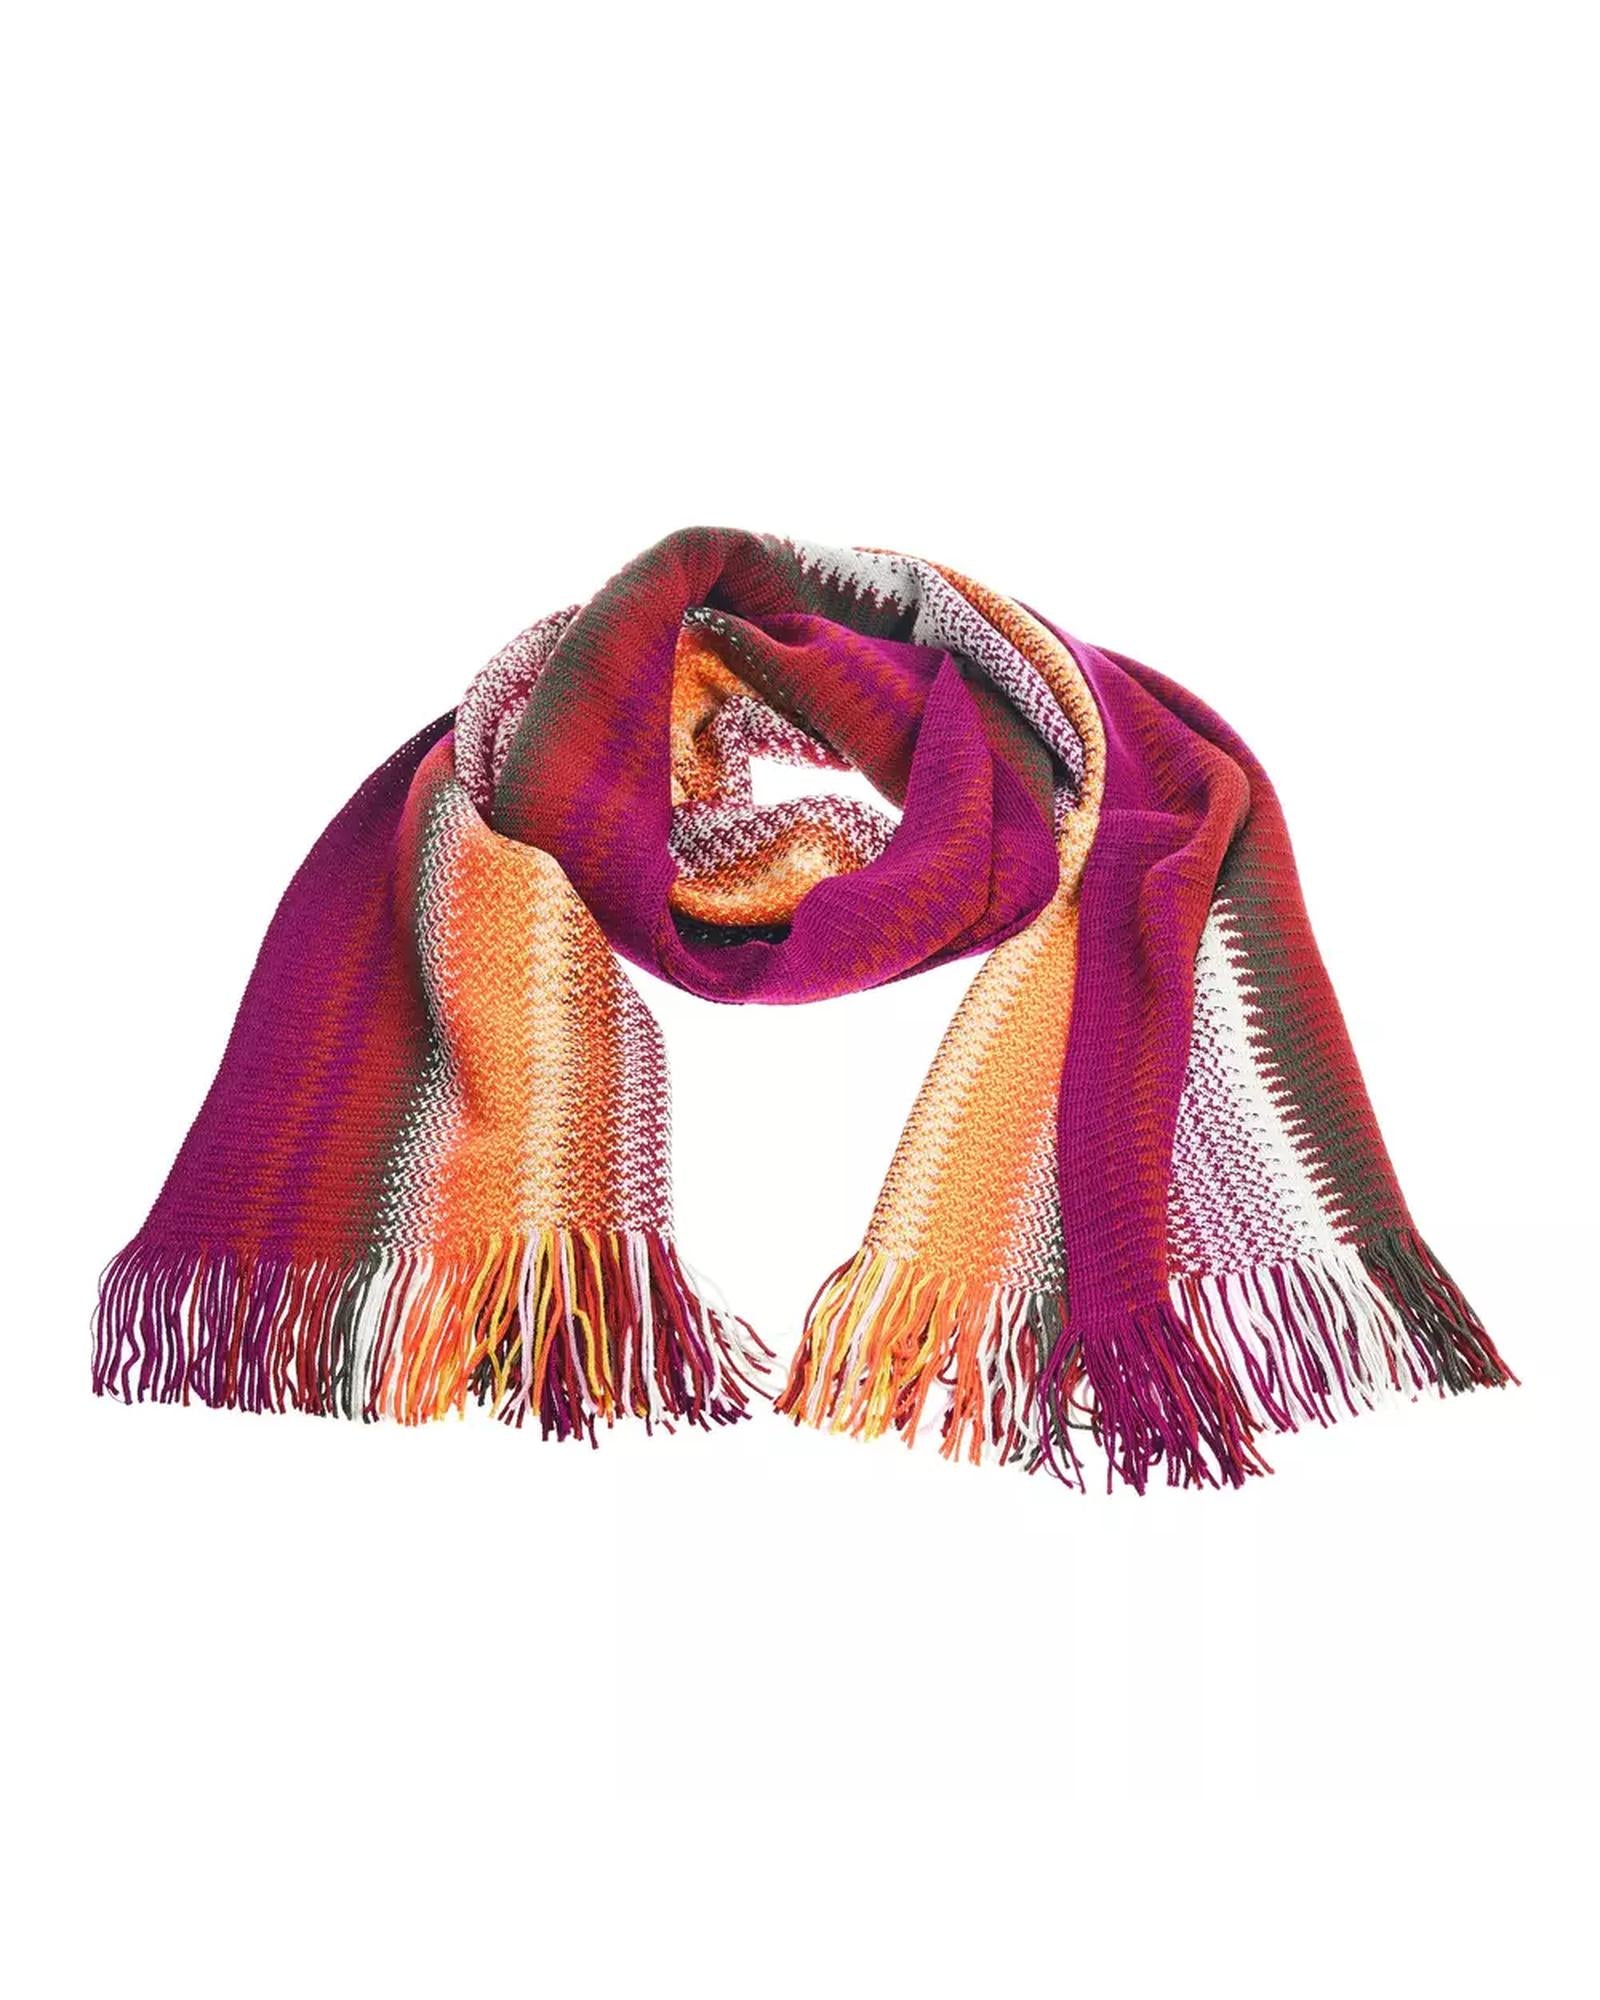 Geometric Pattern Fringed Scarf with Bright Colors One Size Men